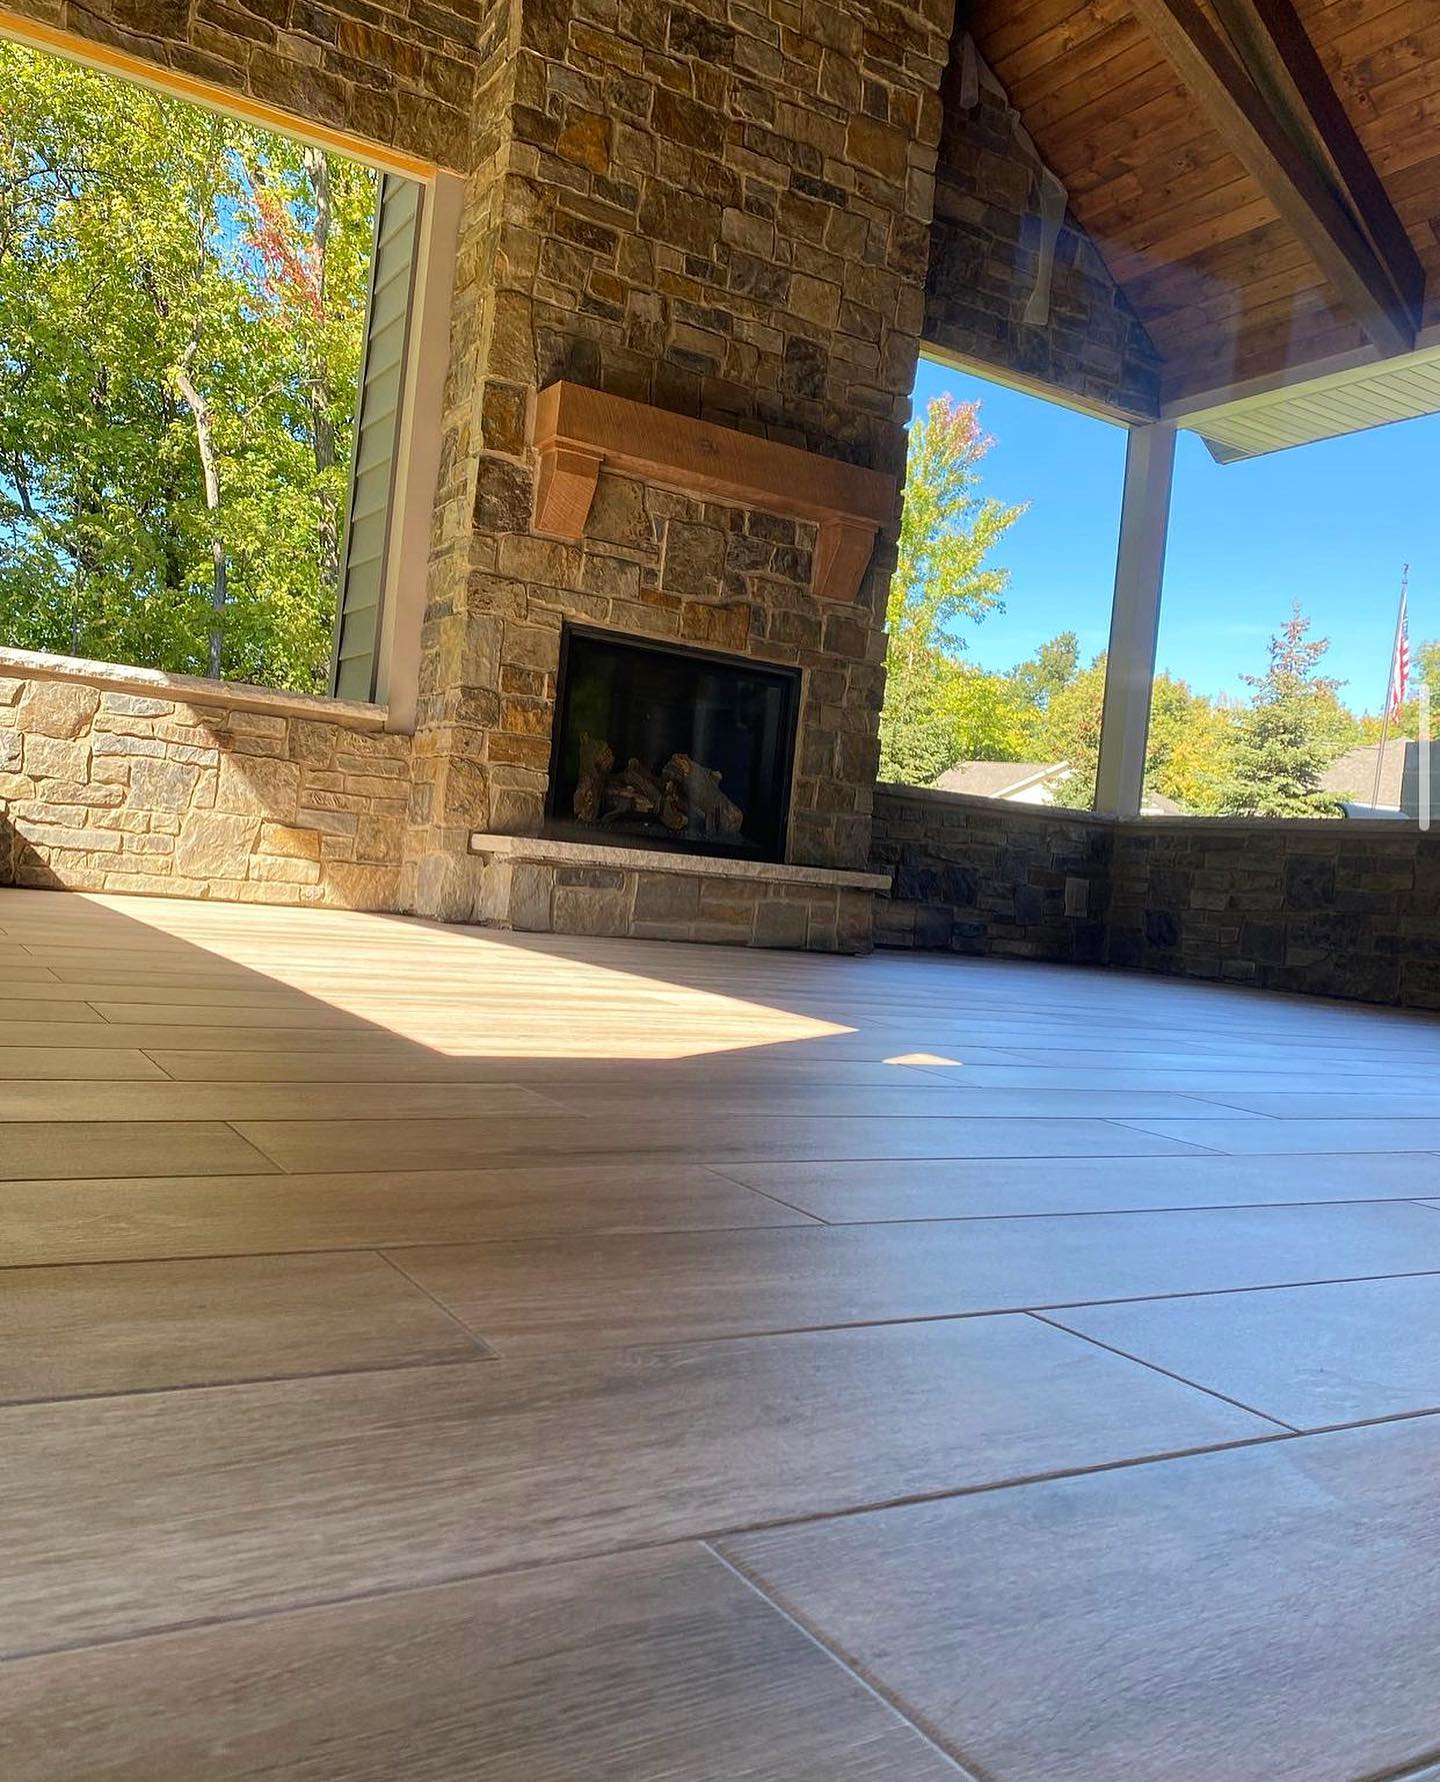 Porch goals 😍 featuring one of our many wood-look tile collections. This glazed porcelain series called Angeles in the color “crest looks amazing in this outdoor/indoor space! Shout out to @aaronlflooring’s install. 🙌🏼🤩 #emsertile